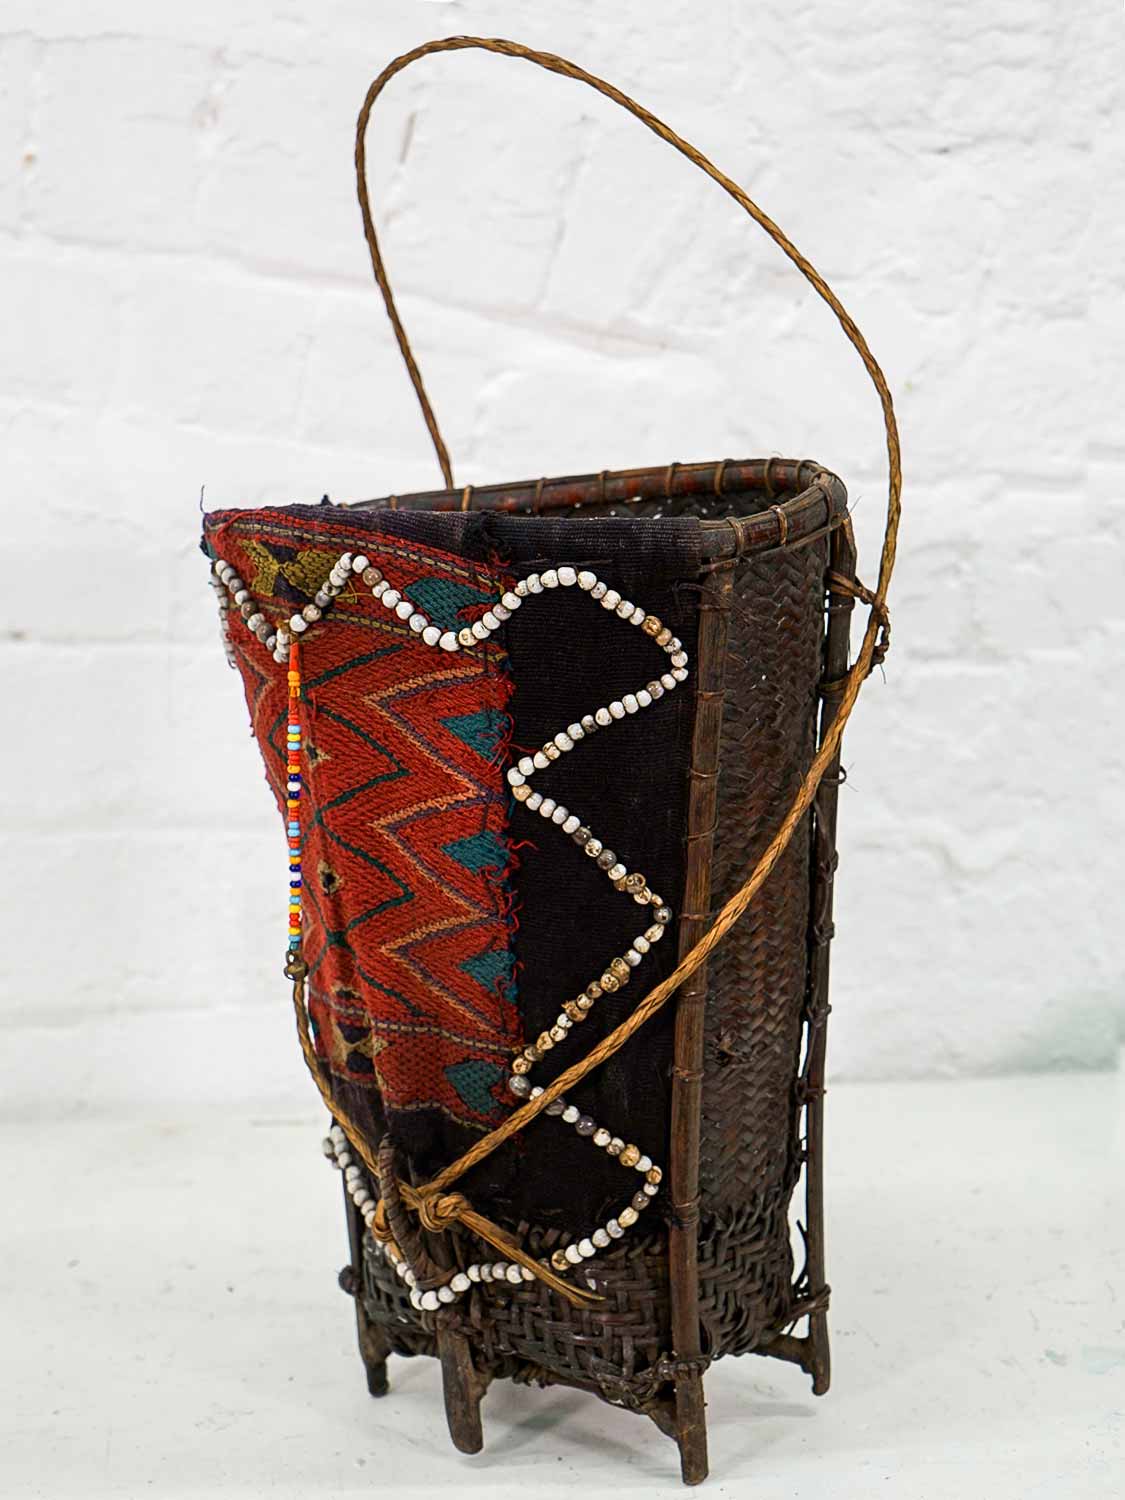 Basket with Woven Fabric and Beads from Nagaland